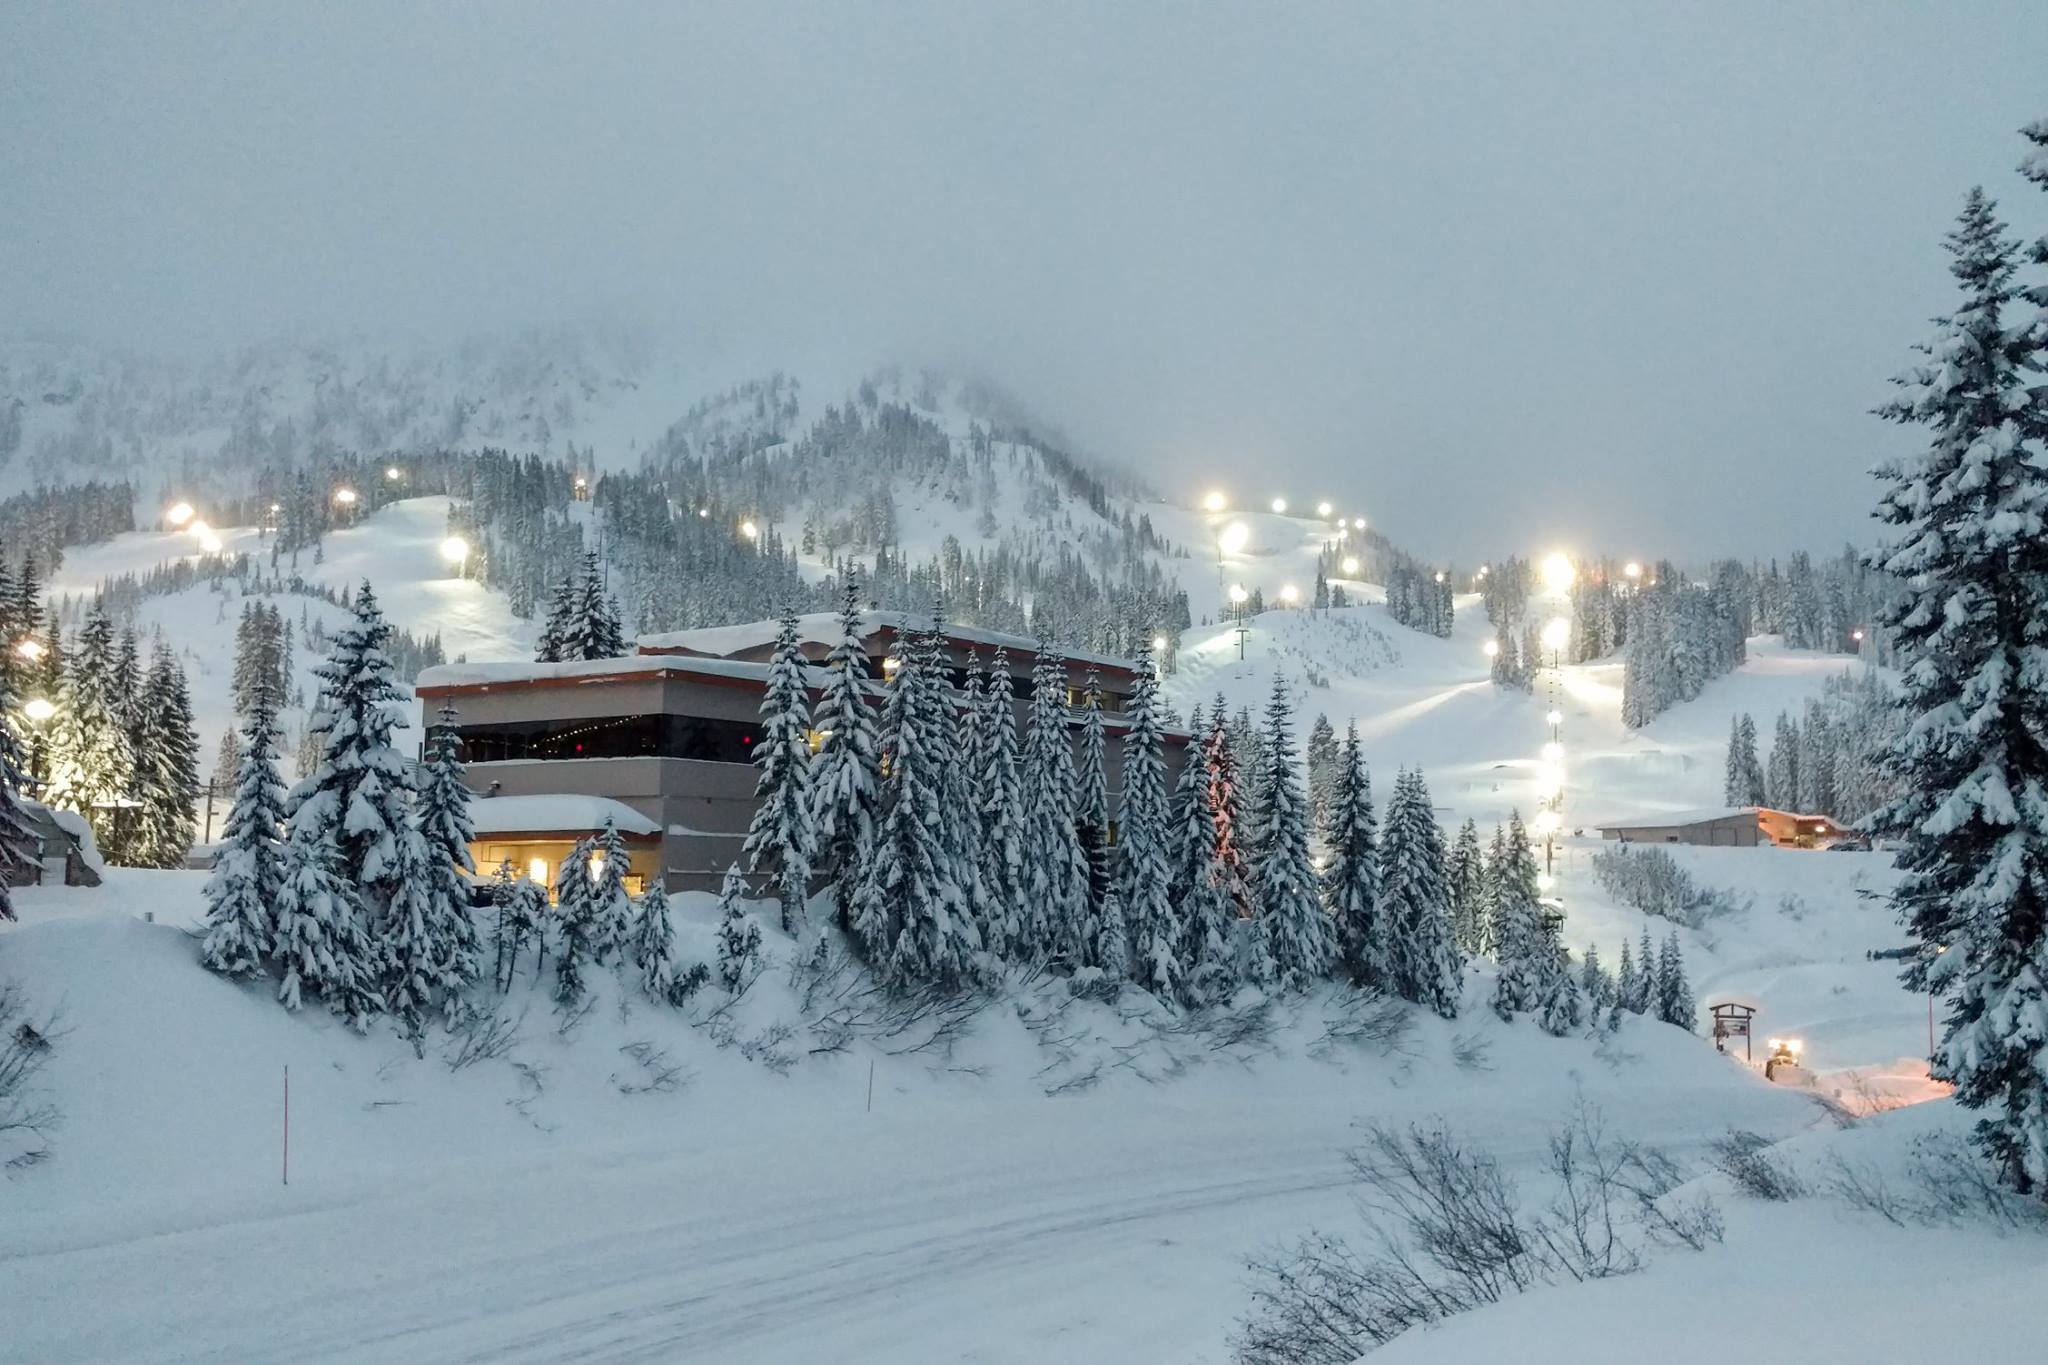 Stevens Pass Montain Resort on Tuesday. Image: Stevens Pass Mountain Resort Facebook Page